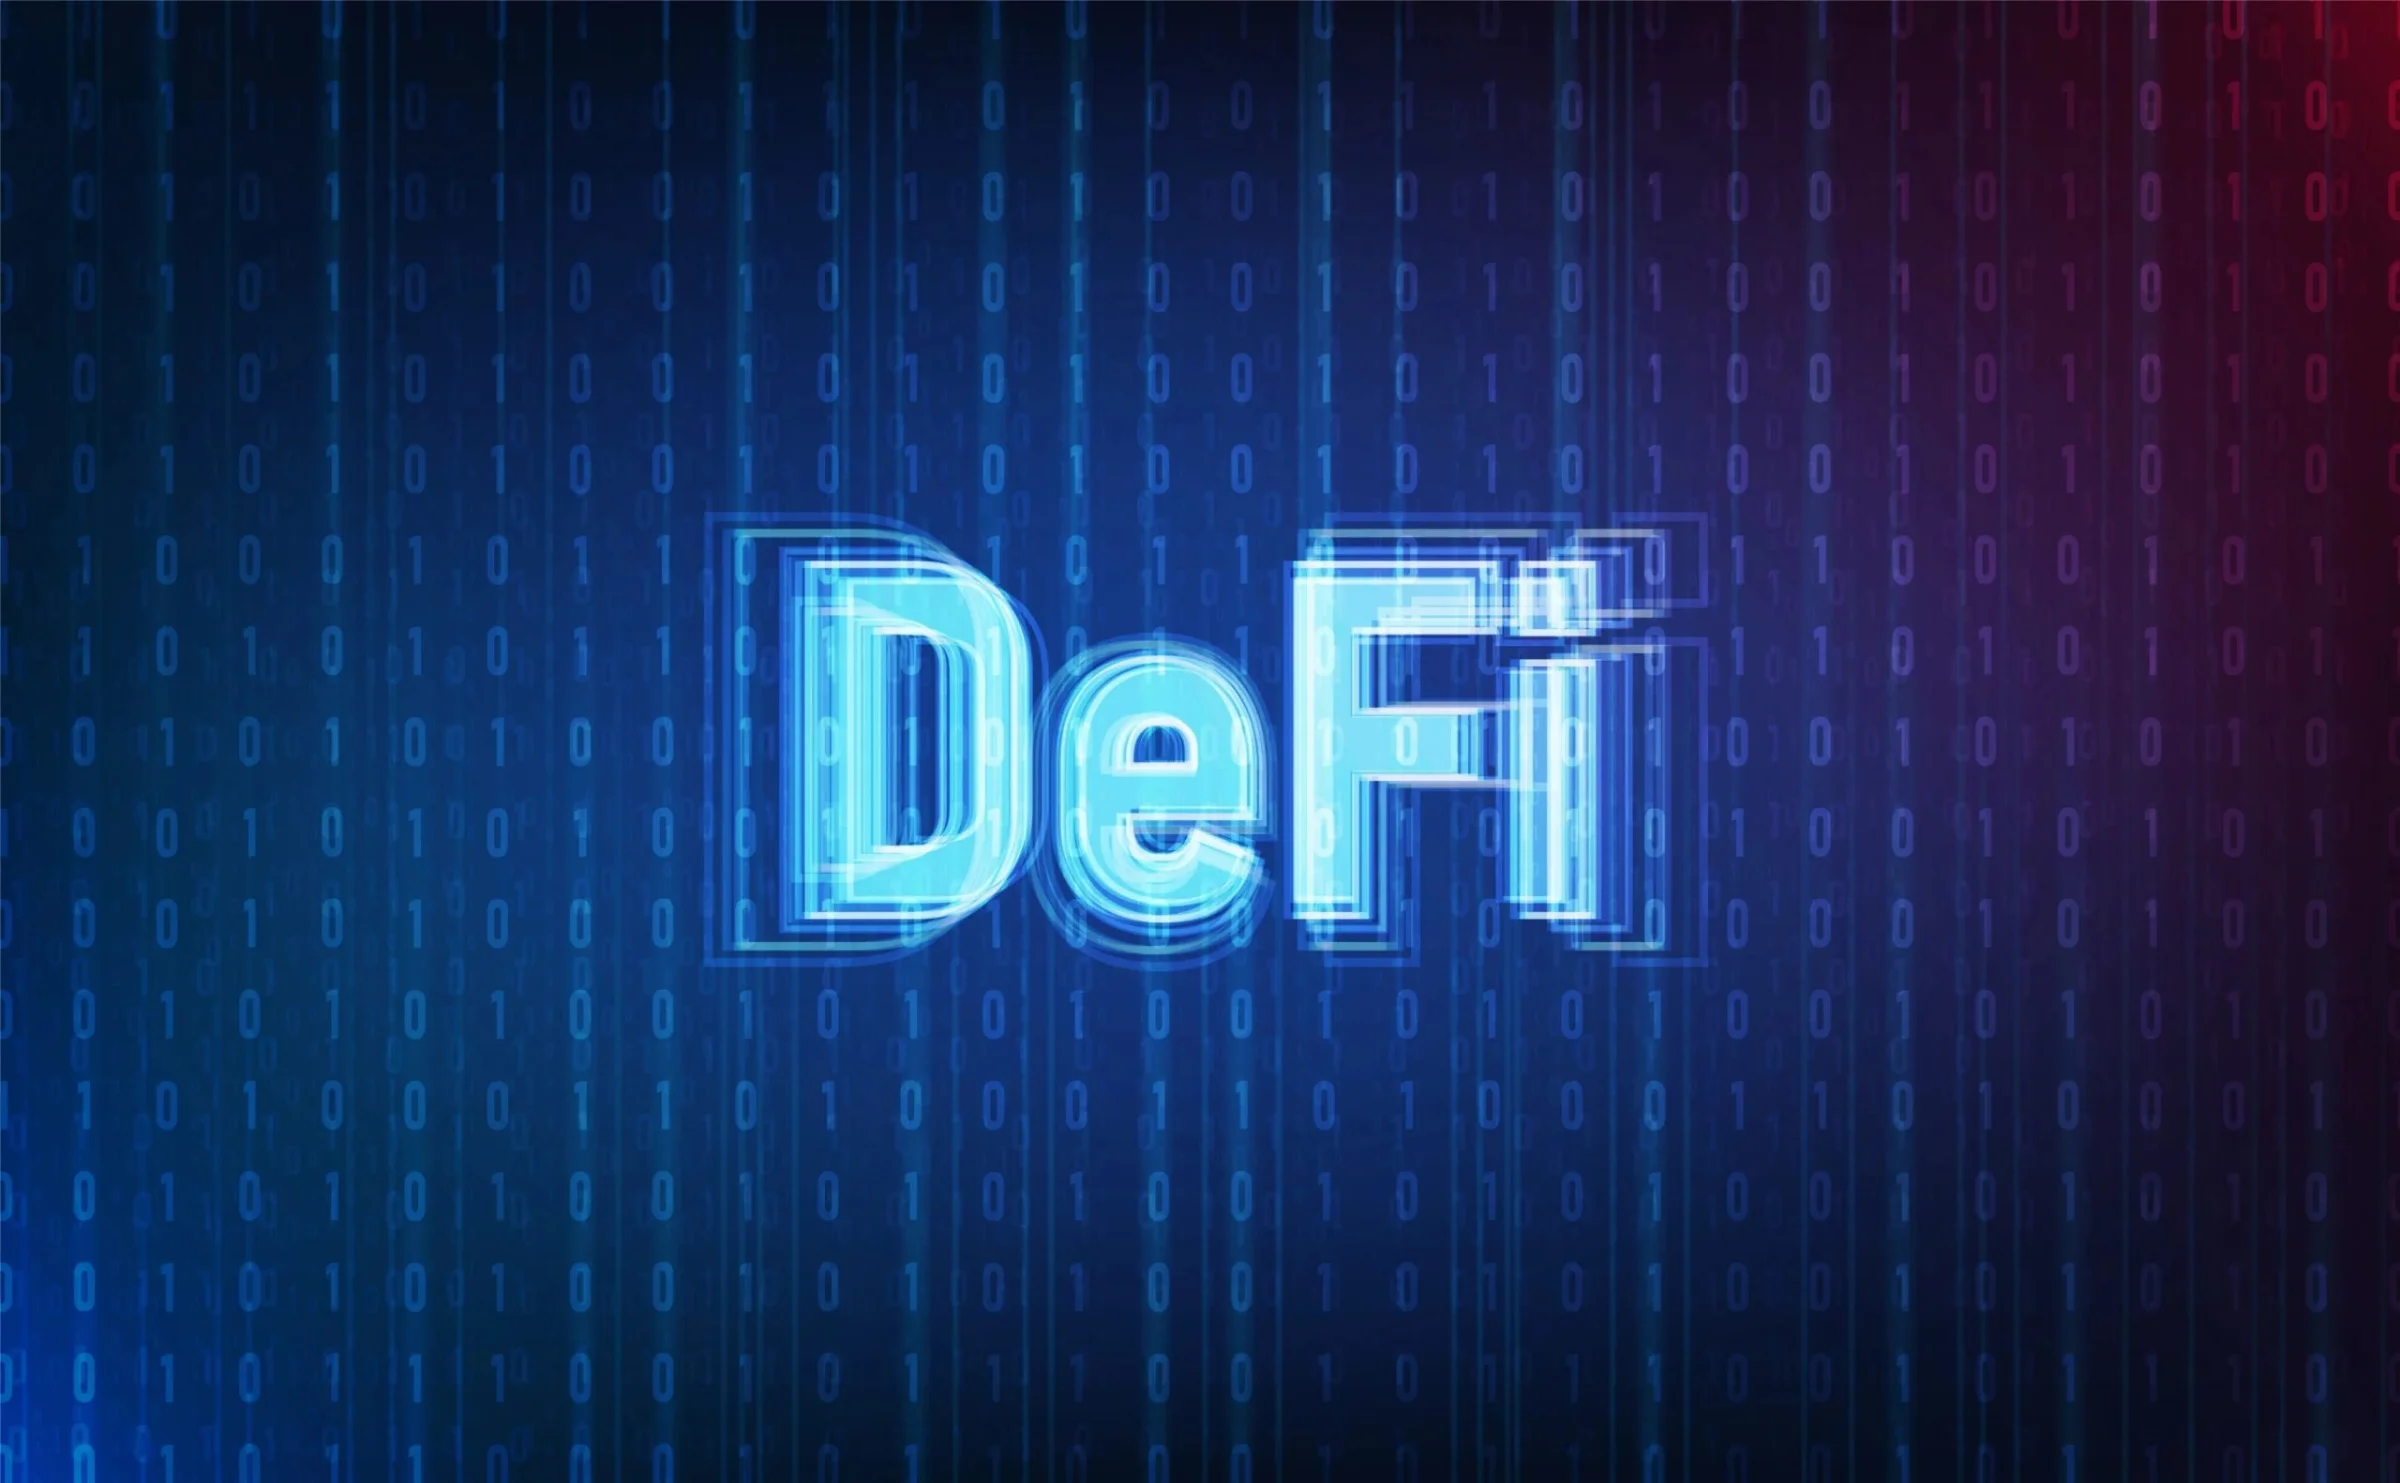 CeFi, DeFi, and Everything In Between